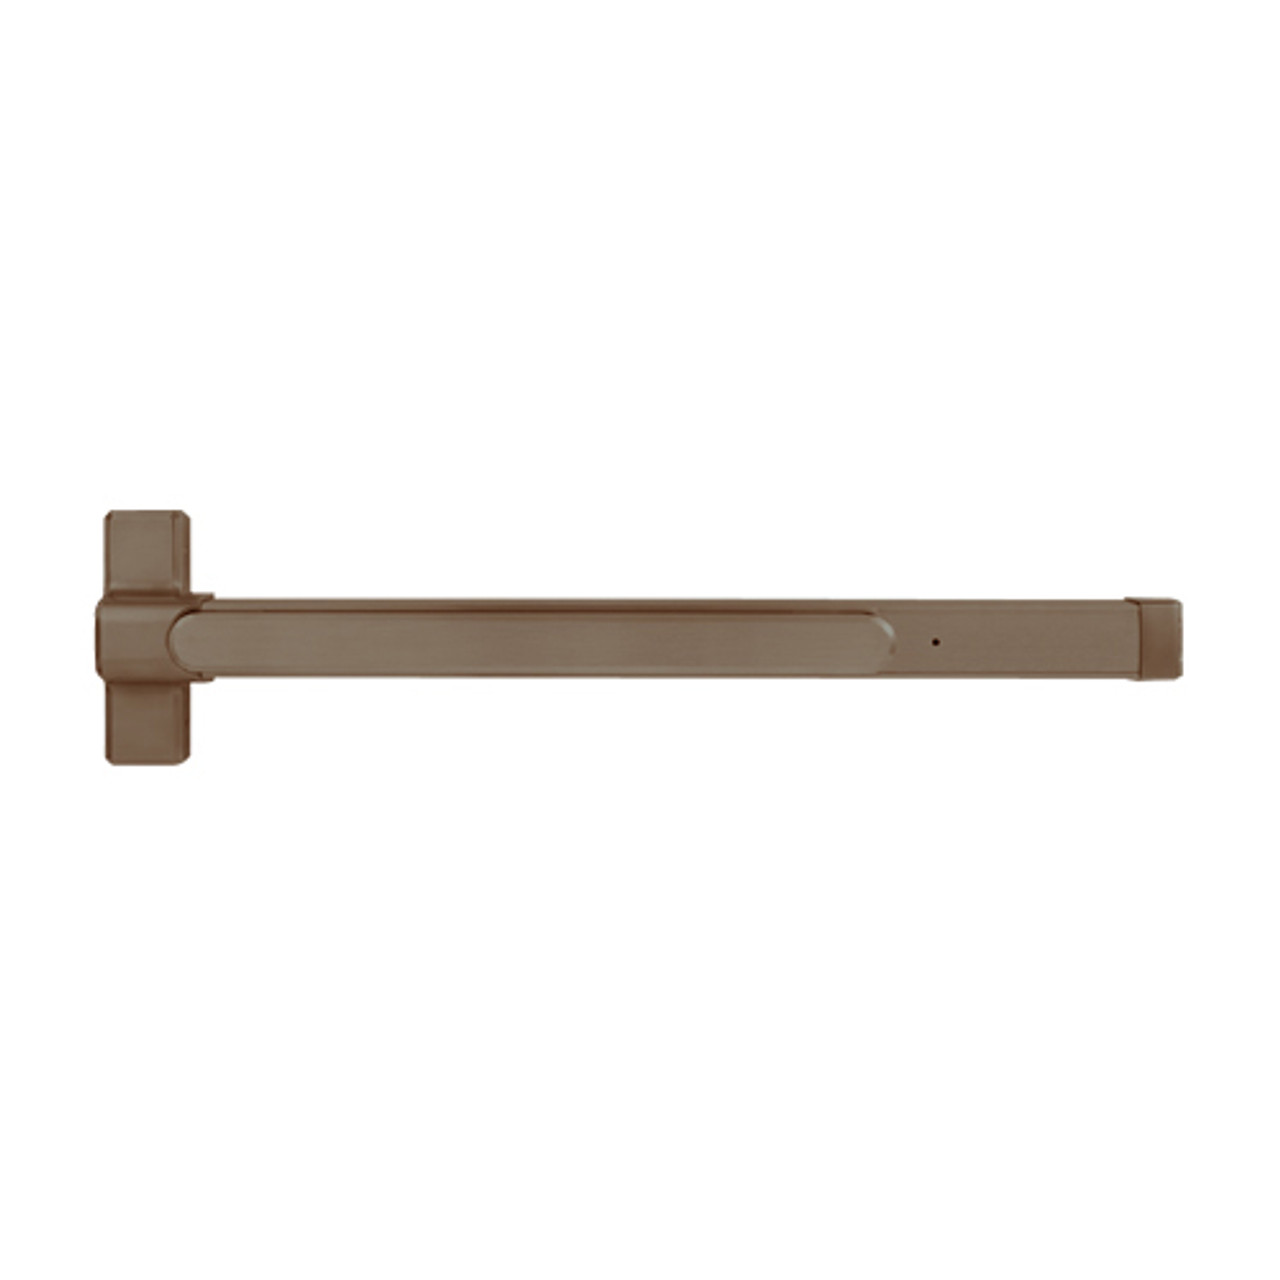 QED118-36-7-313AN-LC Stanley QED100 Series Heavy Duty Surface Vertical Rod Cylinder Dog Exit Device in Anodized Duranodic Bronze Finish